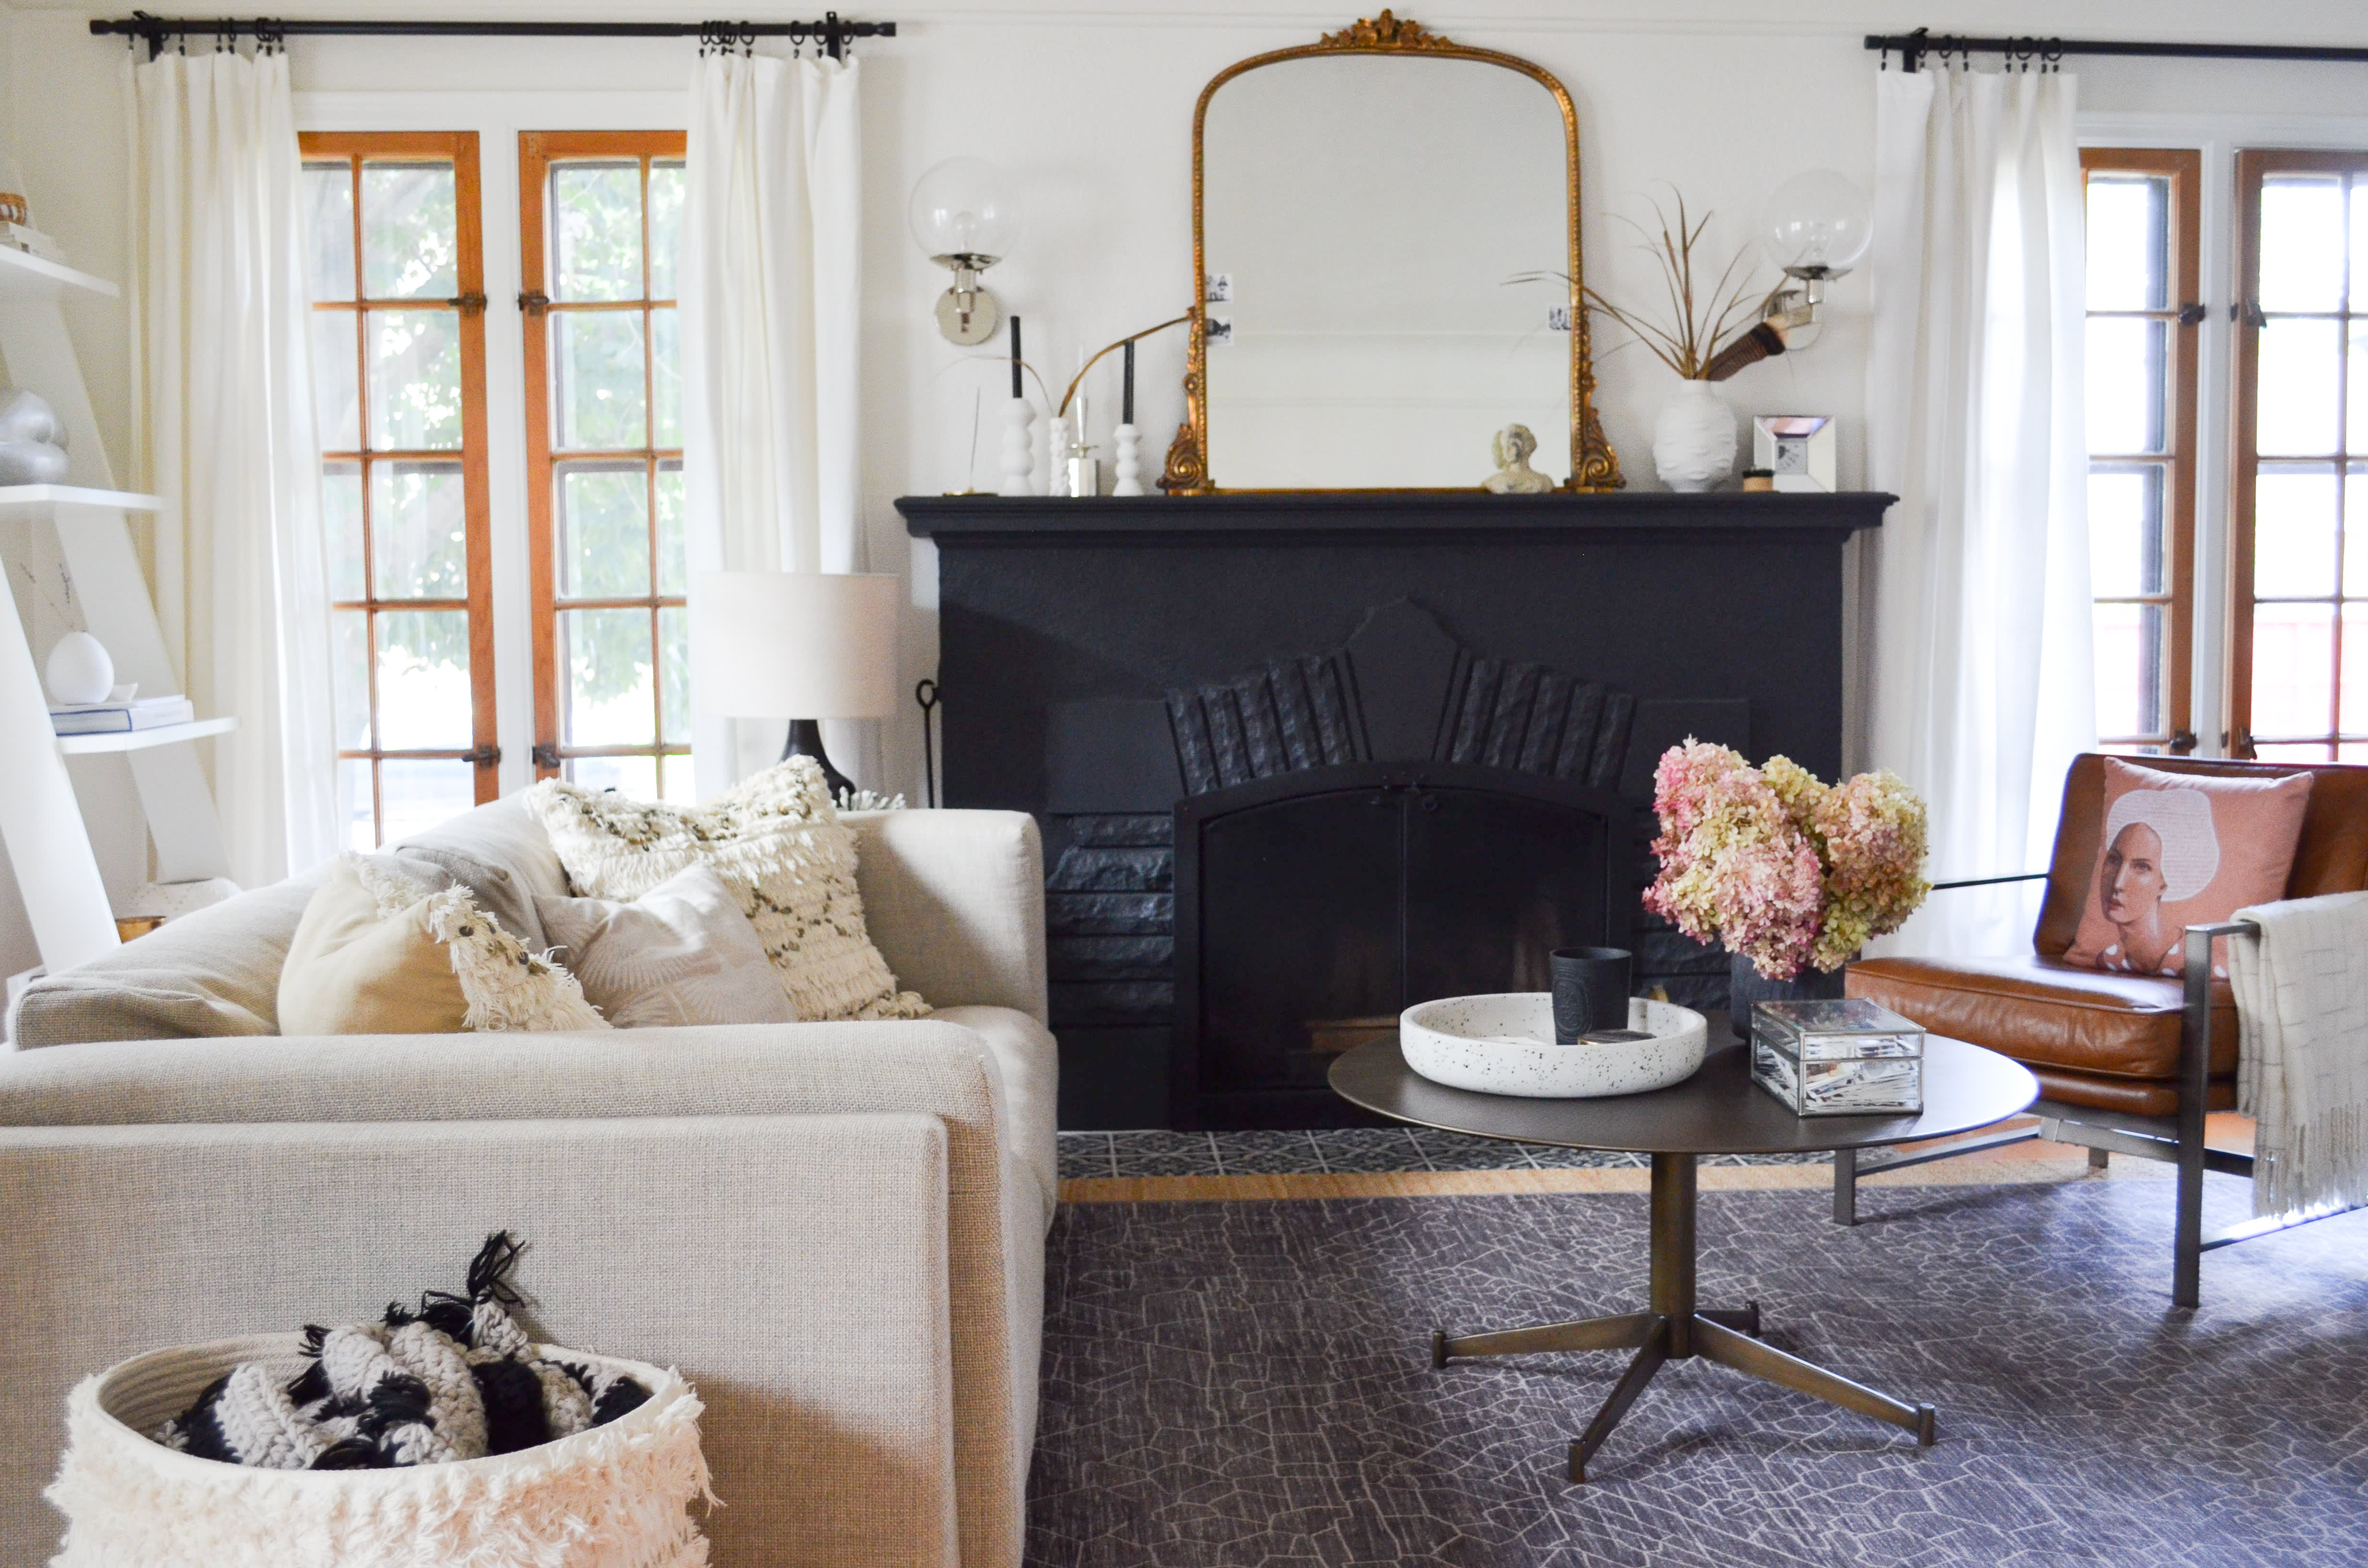 Transitional 1930s Tudor Style Home Photos | Apartment Therapy